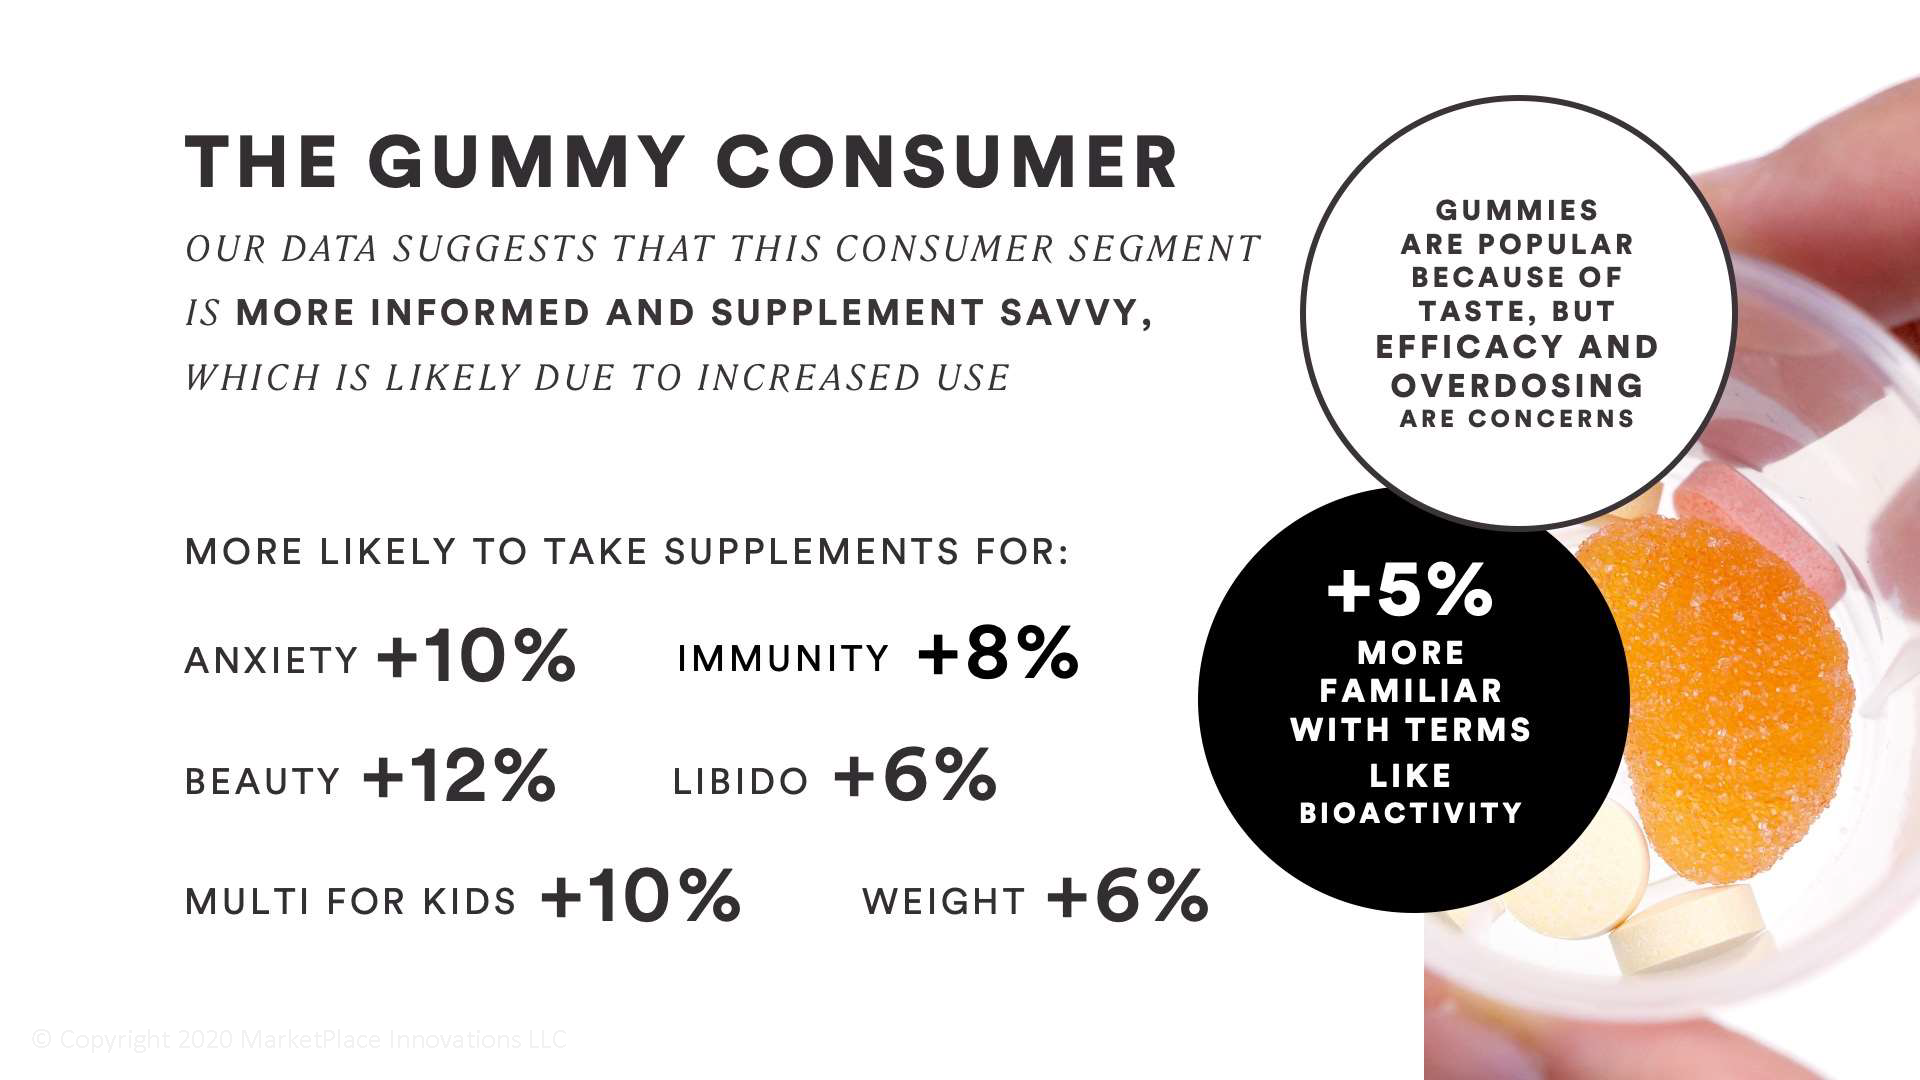 The gummy consumers - health and wellness trends